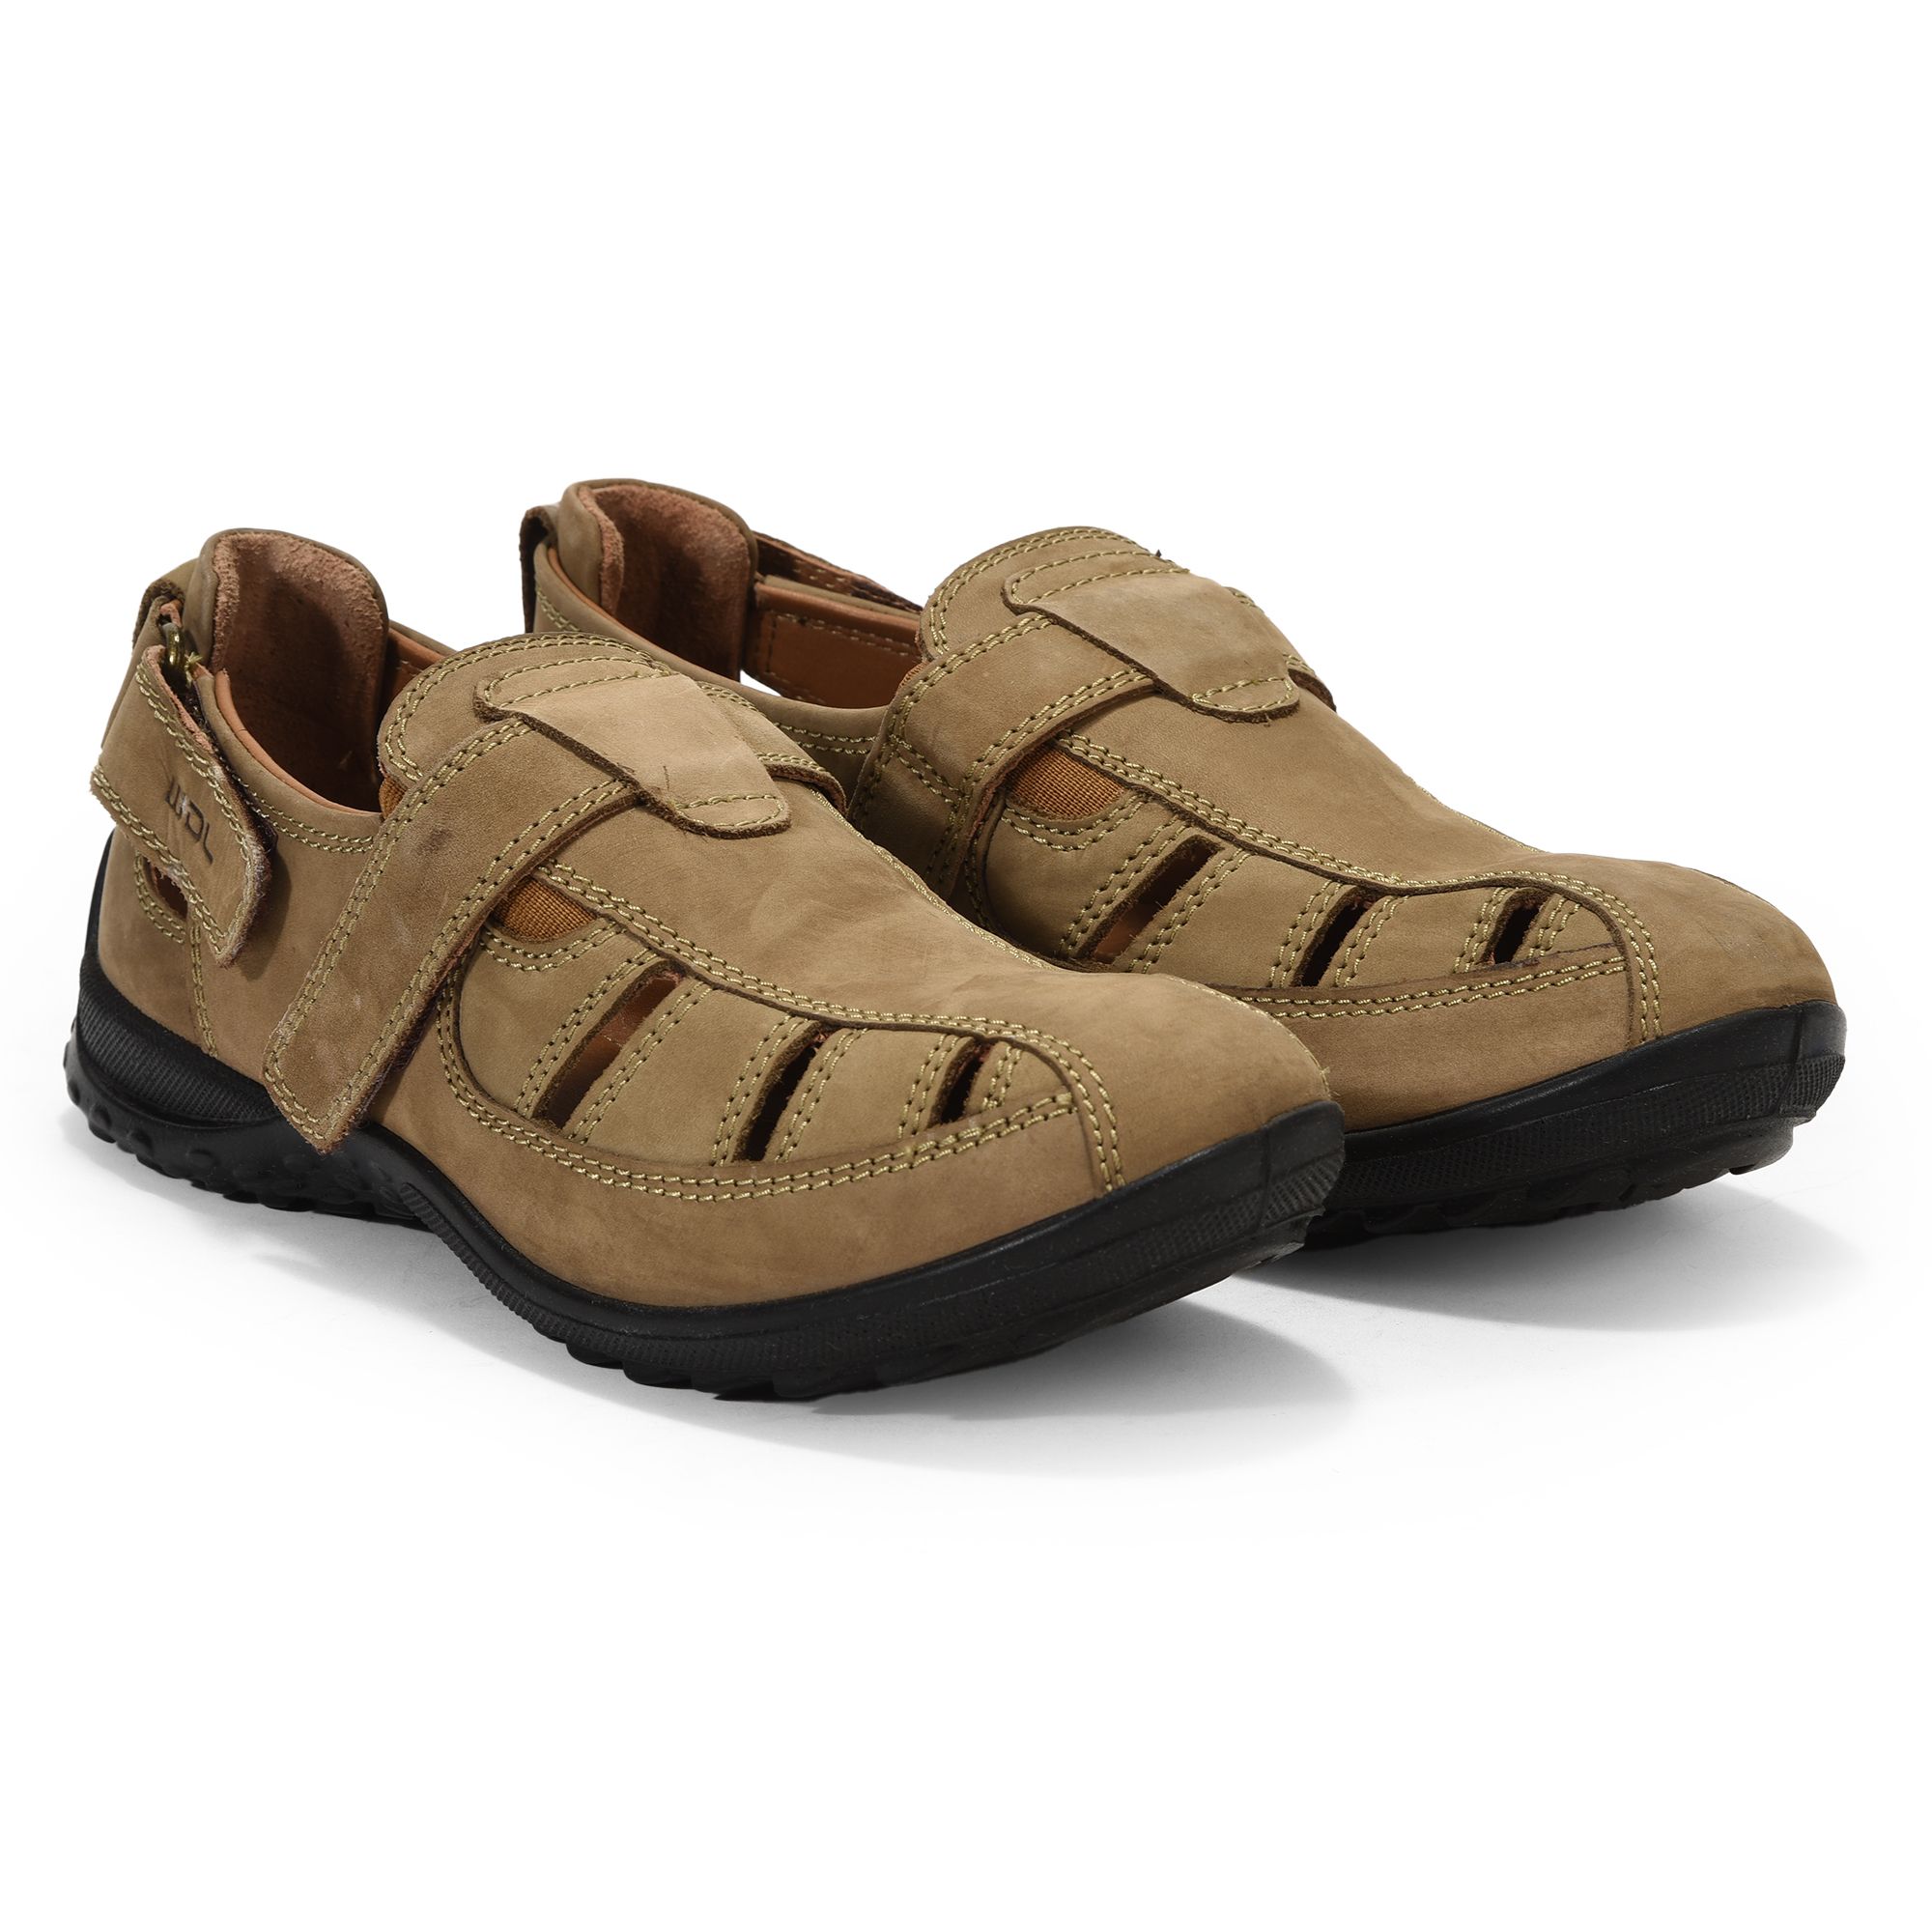 Woodland Sandal And Shoes - Buy Woodland Sandal And Shoes online in India-sgquangbinhtourist.com.vn